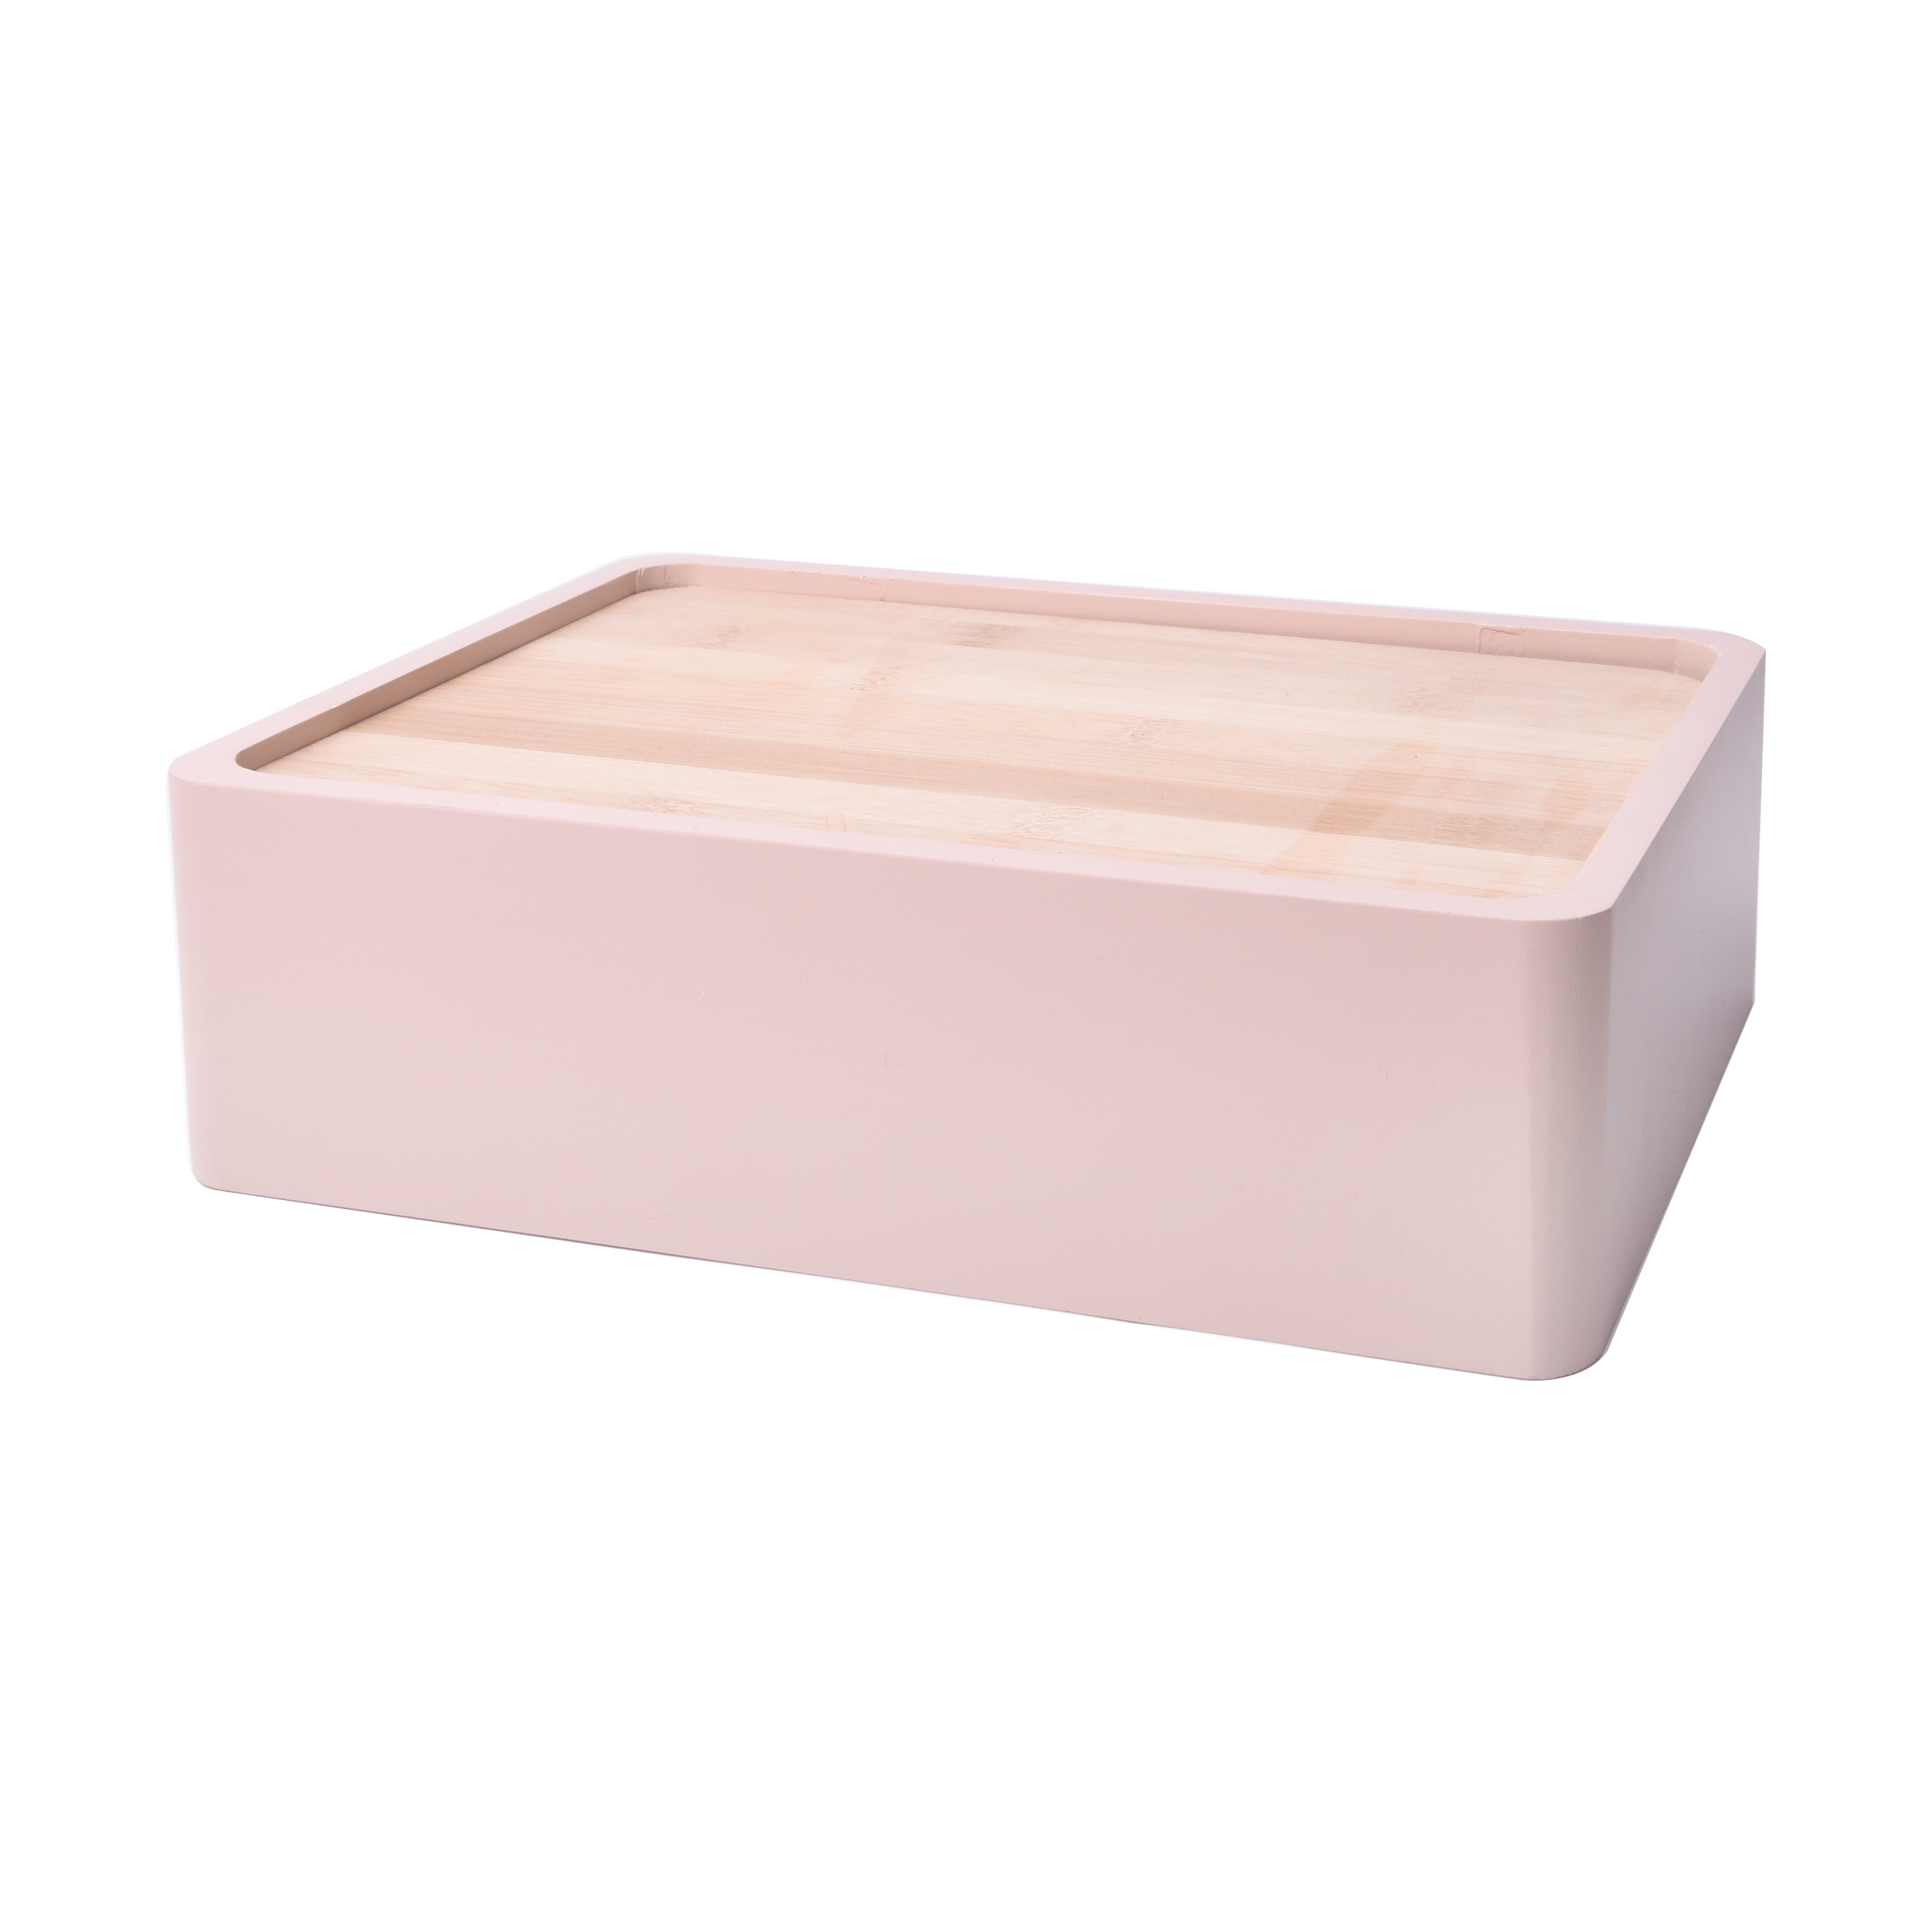 High Quality pink wooden jewelry box with mirror